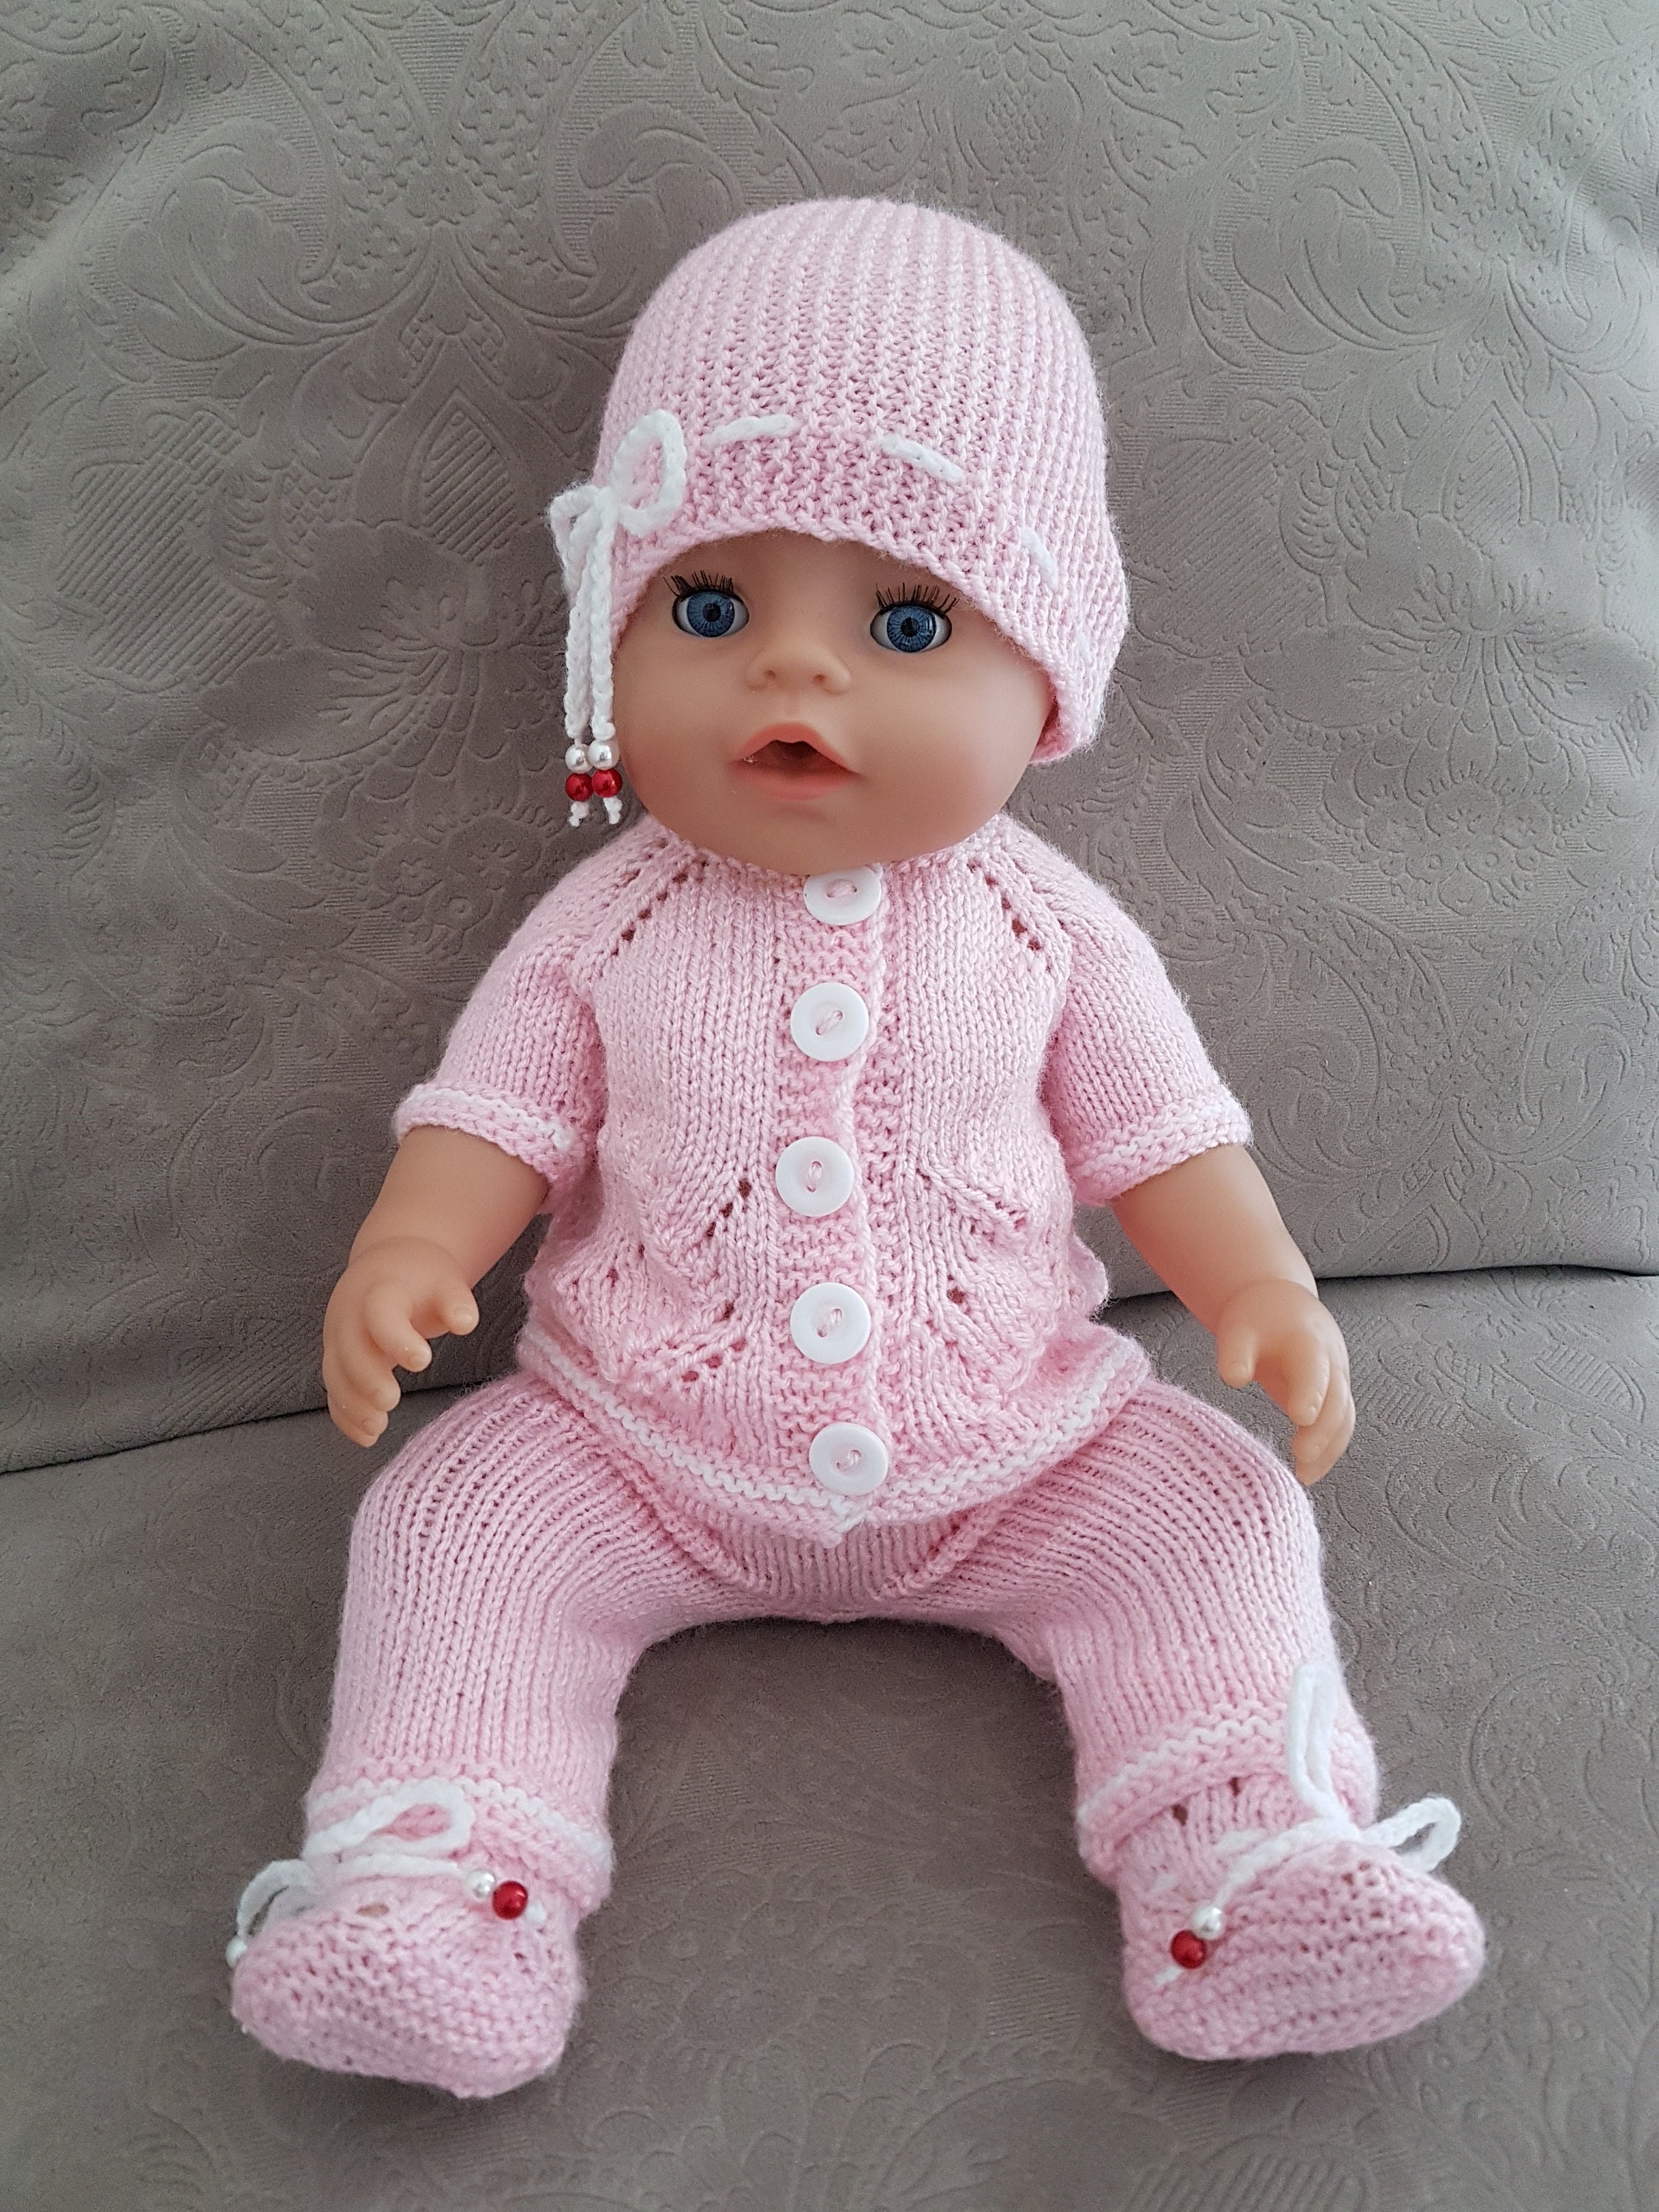 Pink Baby Doll Clothes Baby Born Clothes Set 16 17 inch doll | Etsy